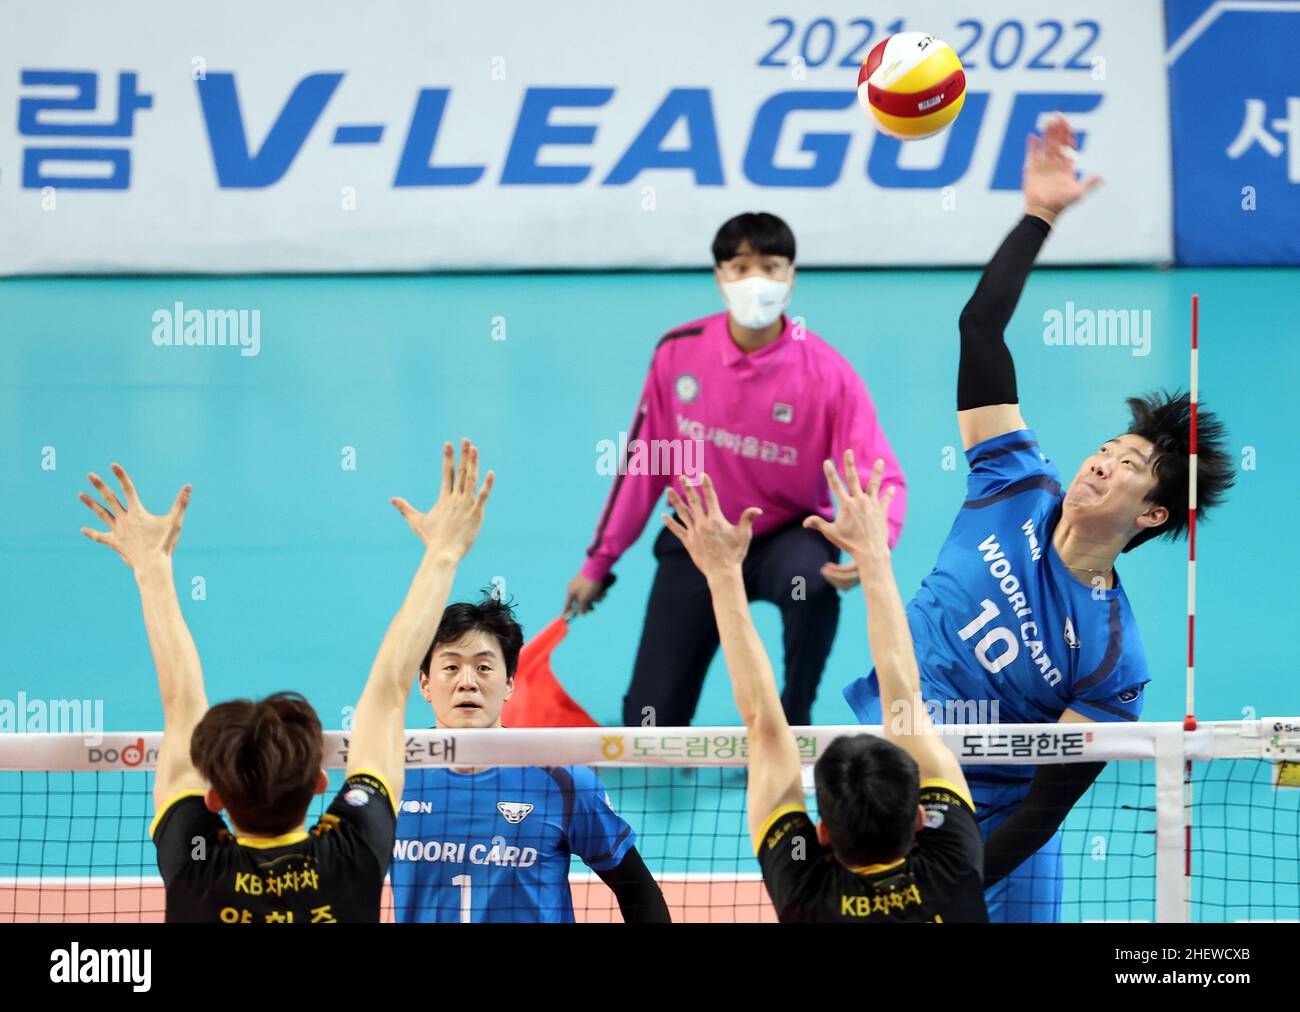 volleyball v league 2022 live